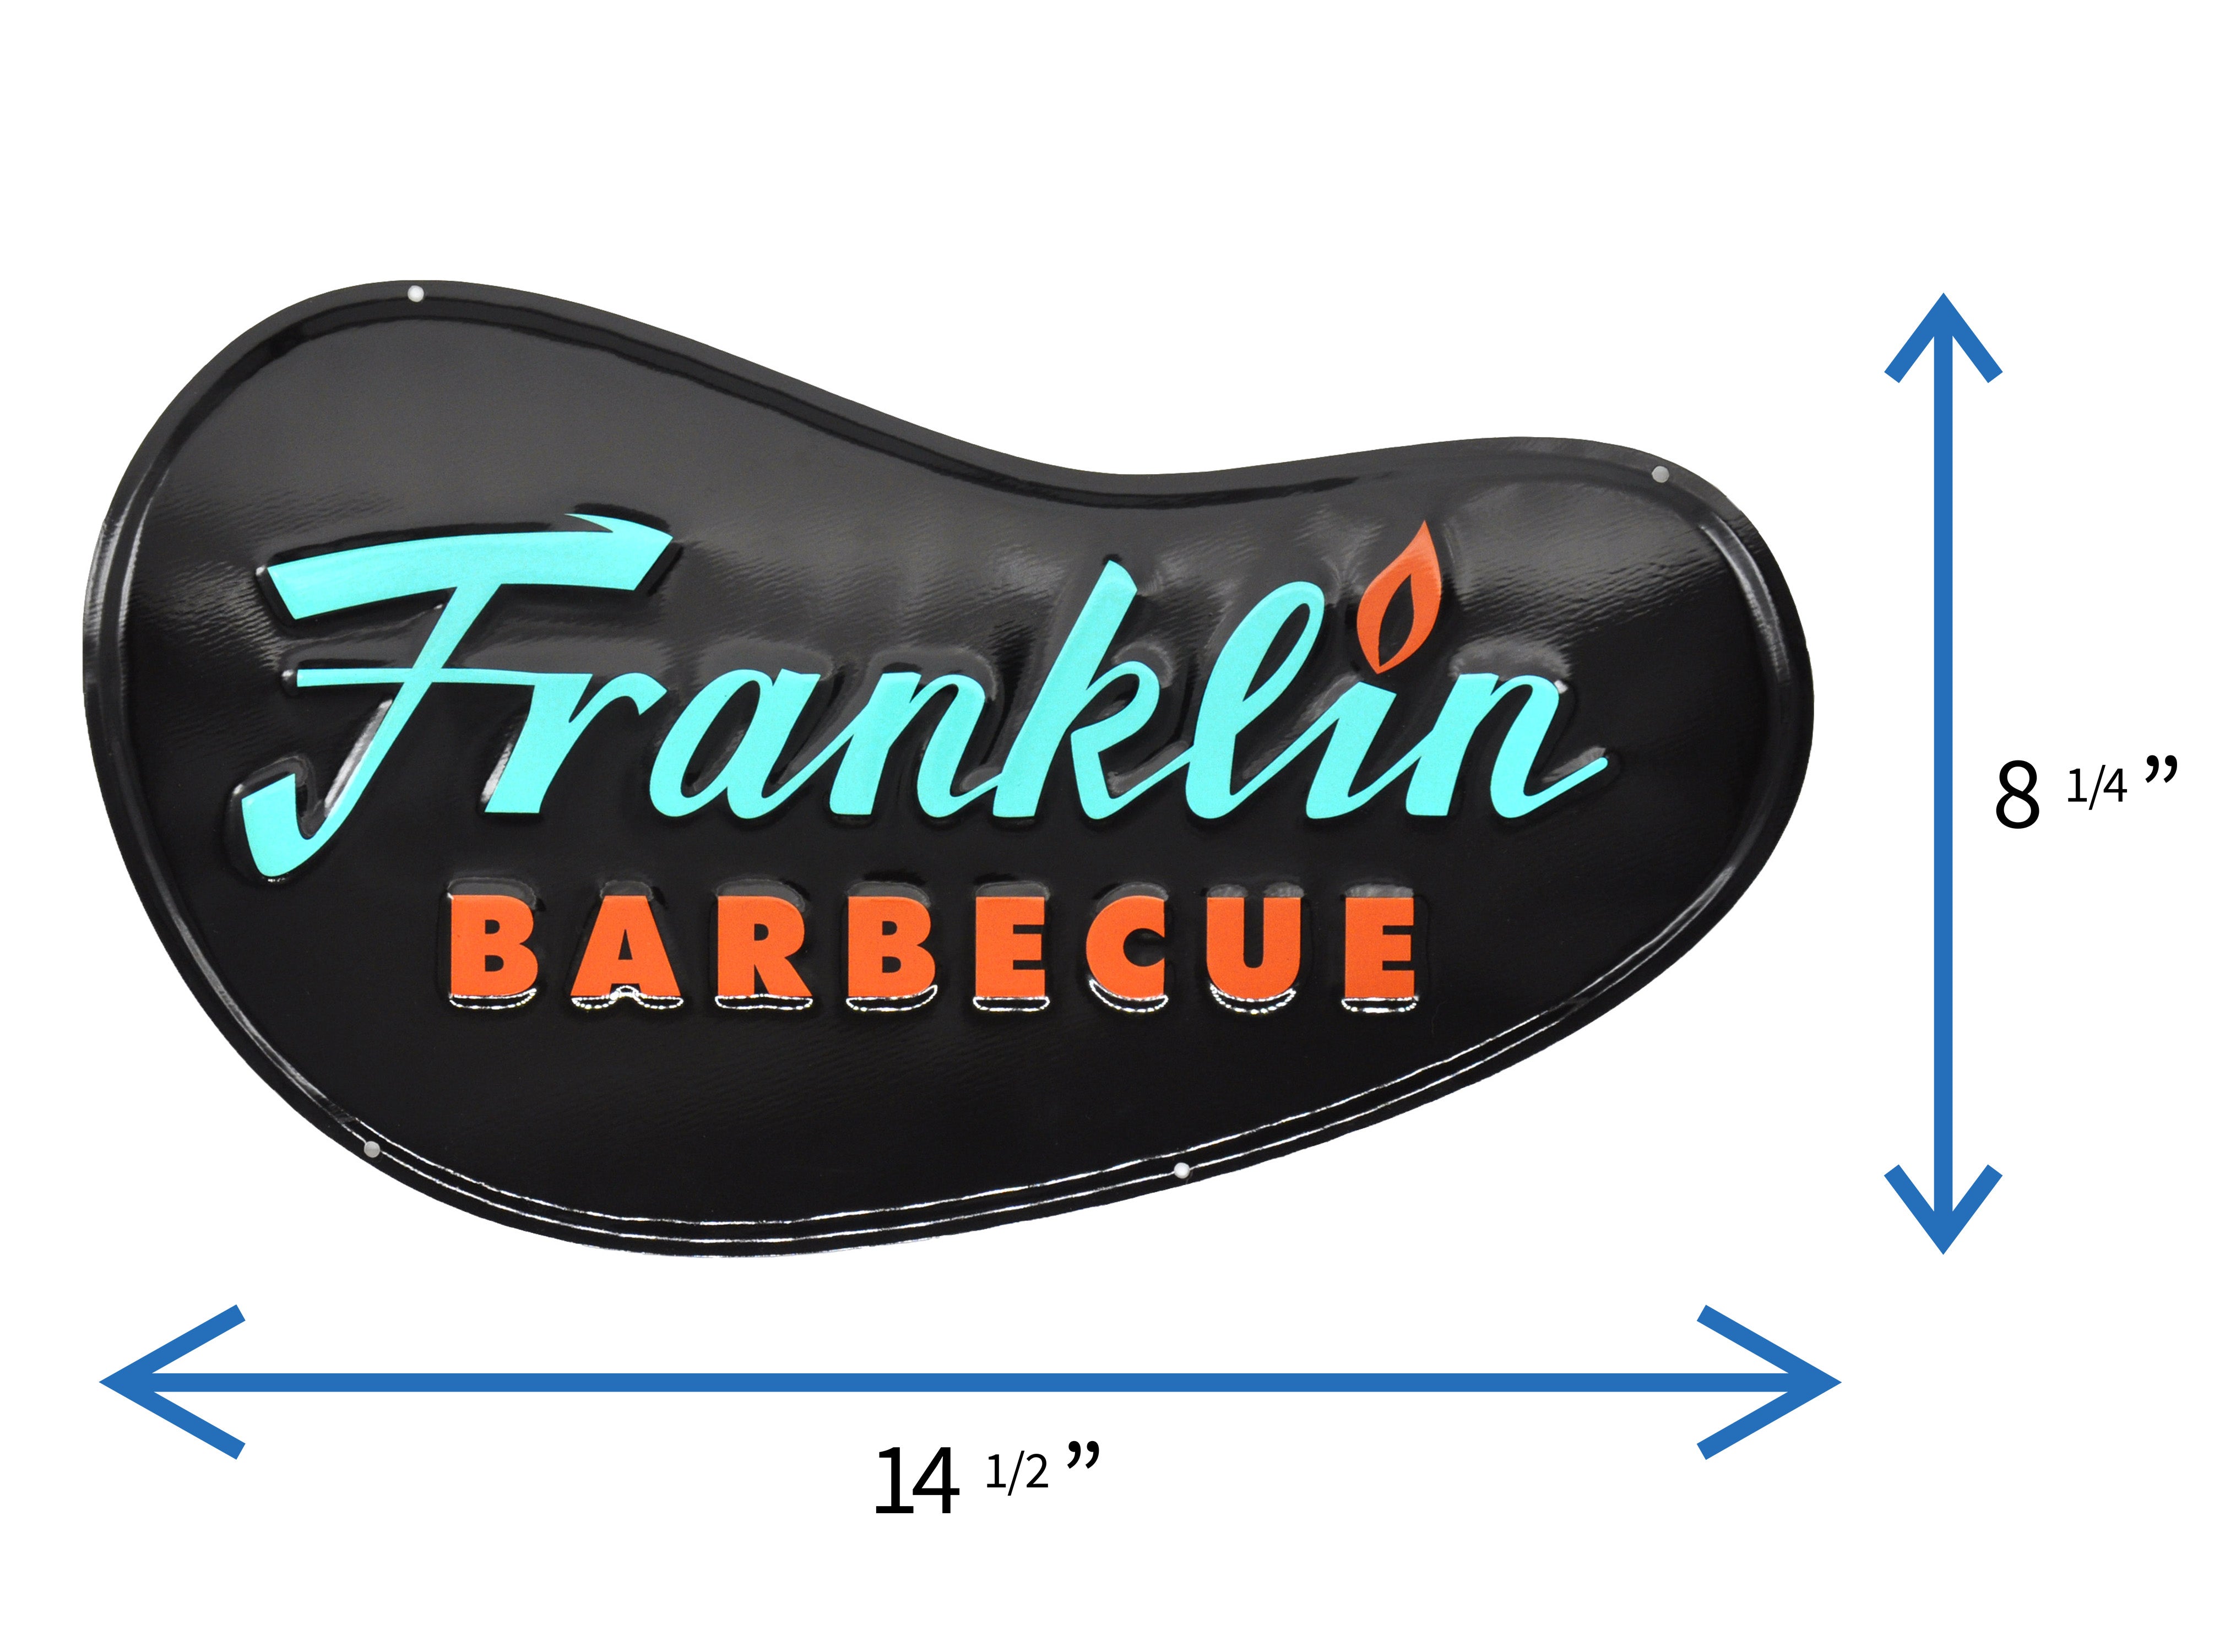 Aluminum tacker sign in the shape of the Franklin Barbecue restaurant sign. Dimensions are shown 14.5" x 8.25"